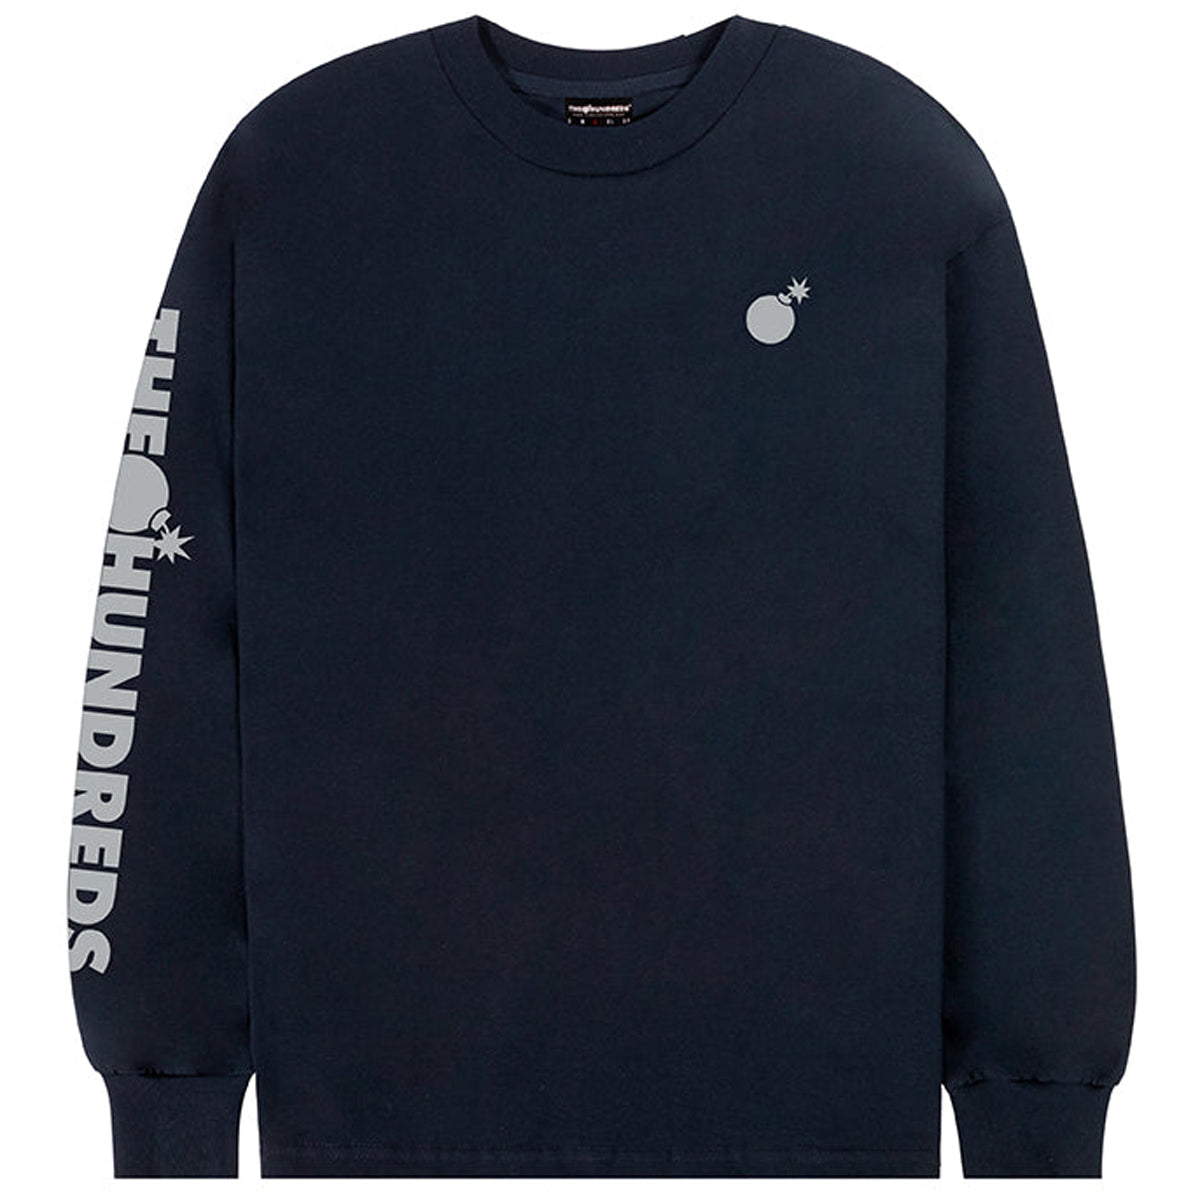 The Hundreds Solid Bomb Crest Long Sleeve T-Shirt - True Navy image 1